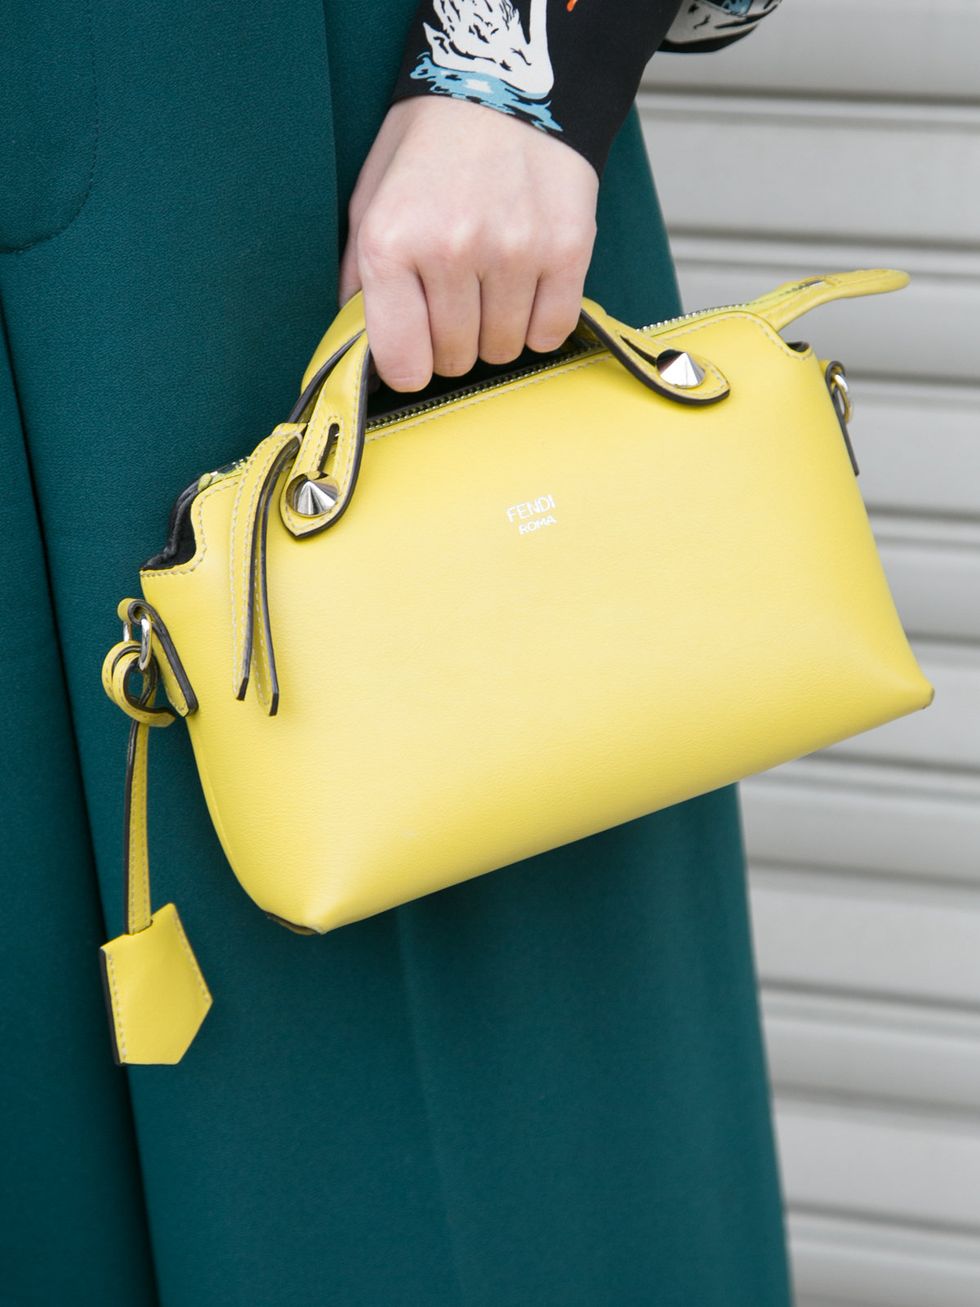 Bag, Handbag, Yellow, Green, Shoulder, Fashion accessory, Kelly bag, Electric blue, Turquoise, Joint, 